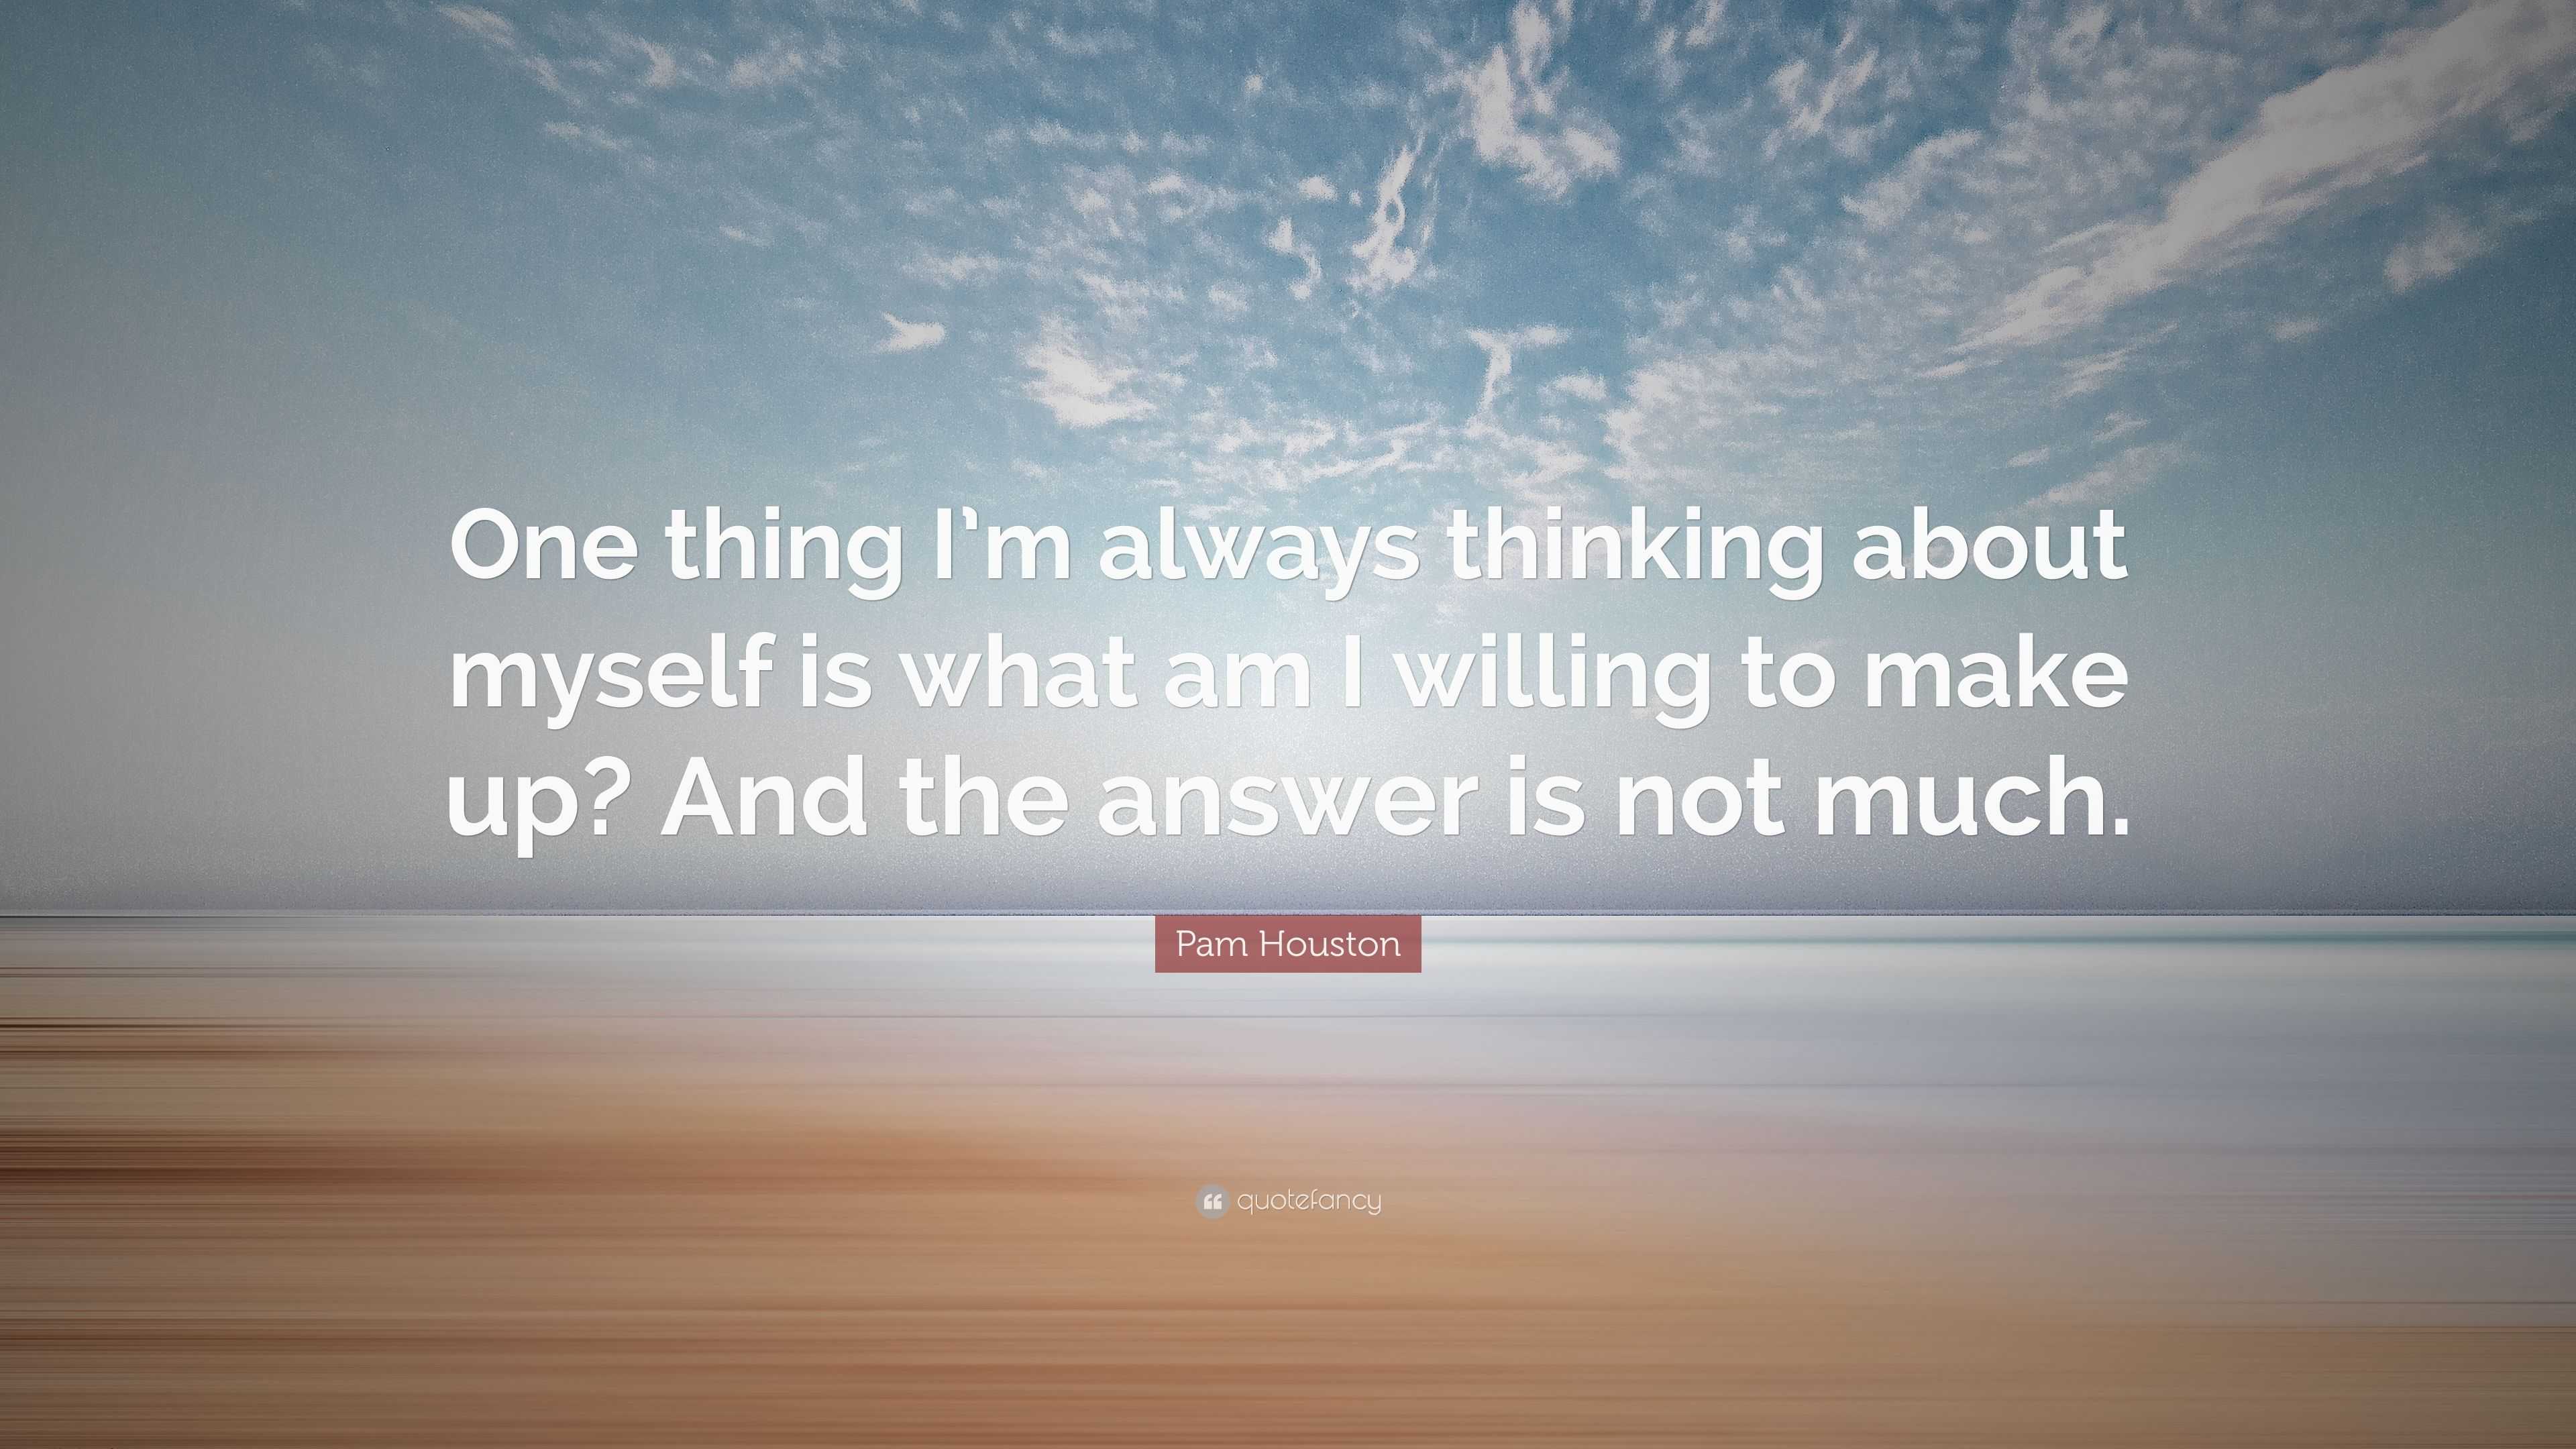 Pam Houston Quote: “One thing I’m always thinking about myself is what ...